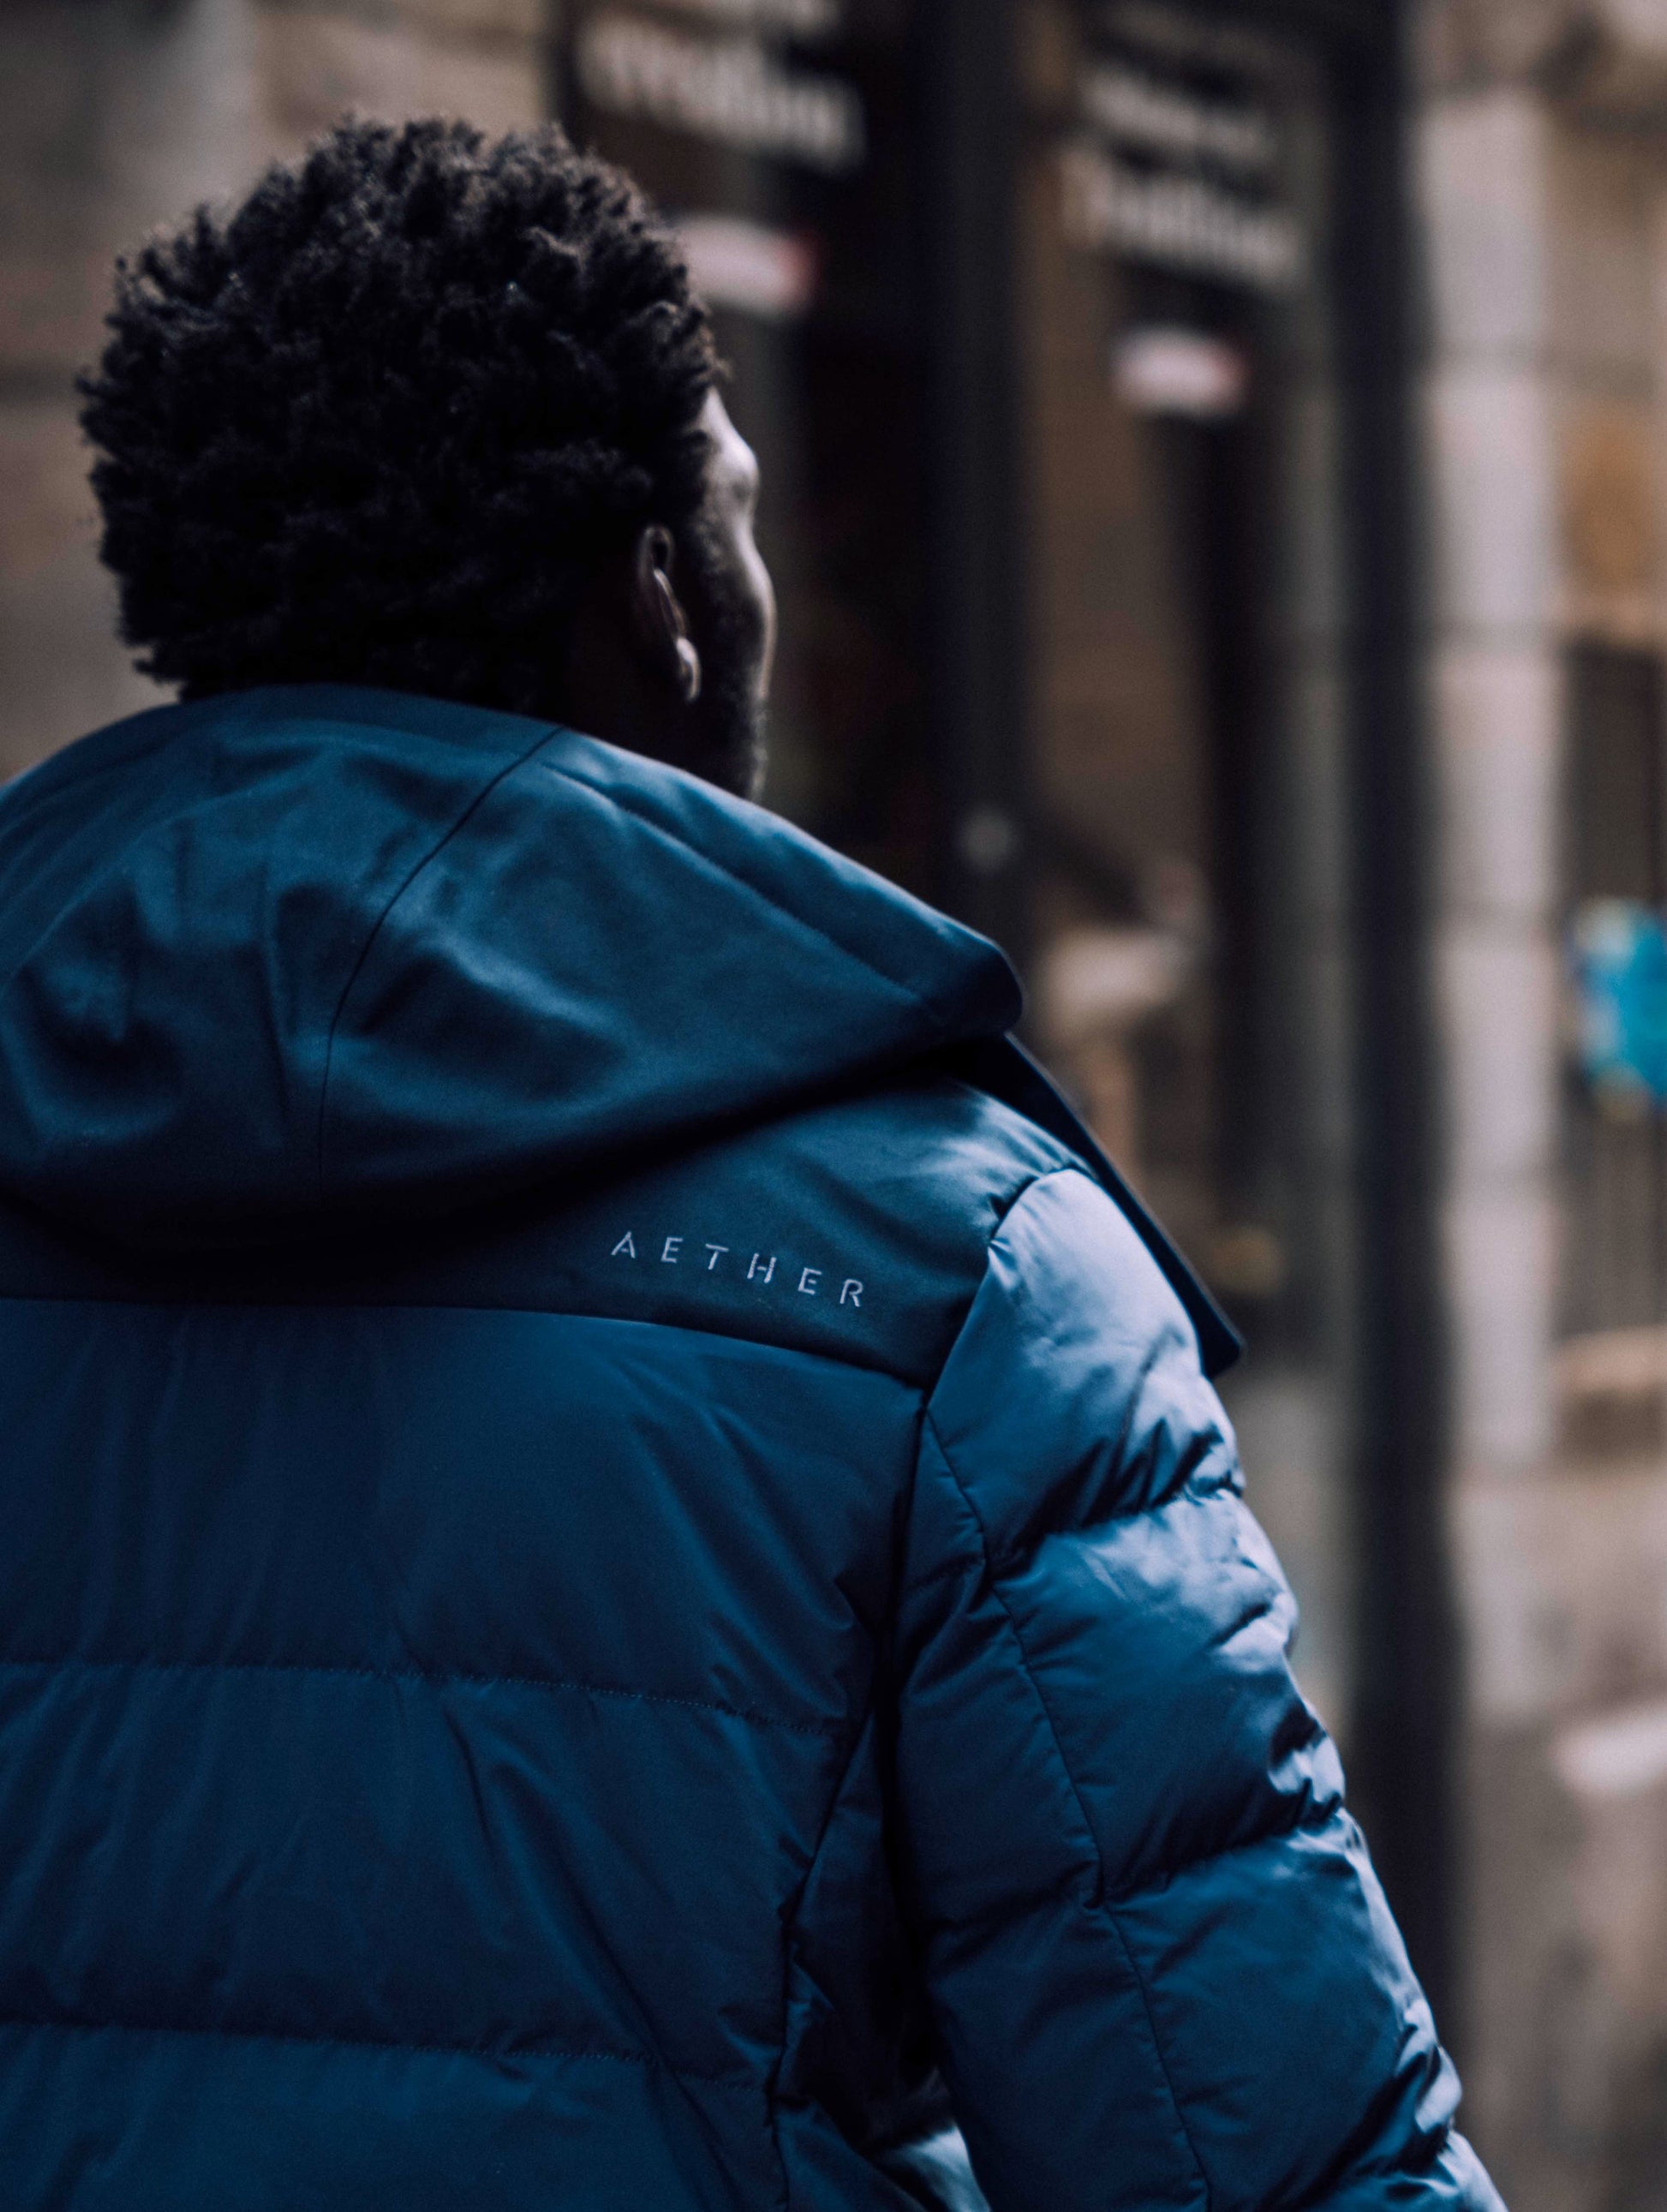 man wearing blue parka with AETHER logo on back